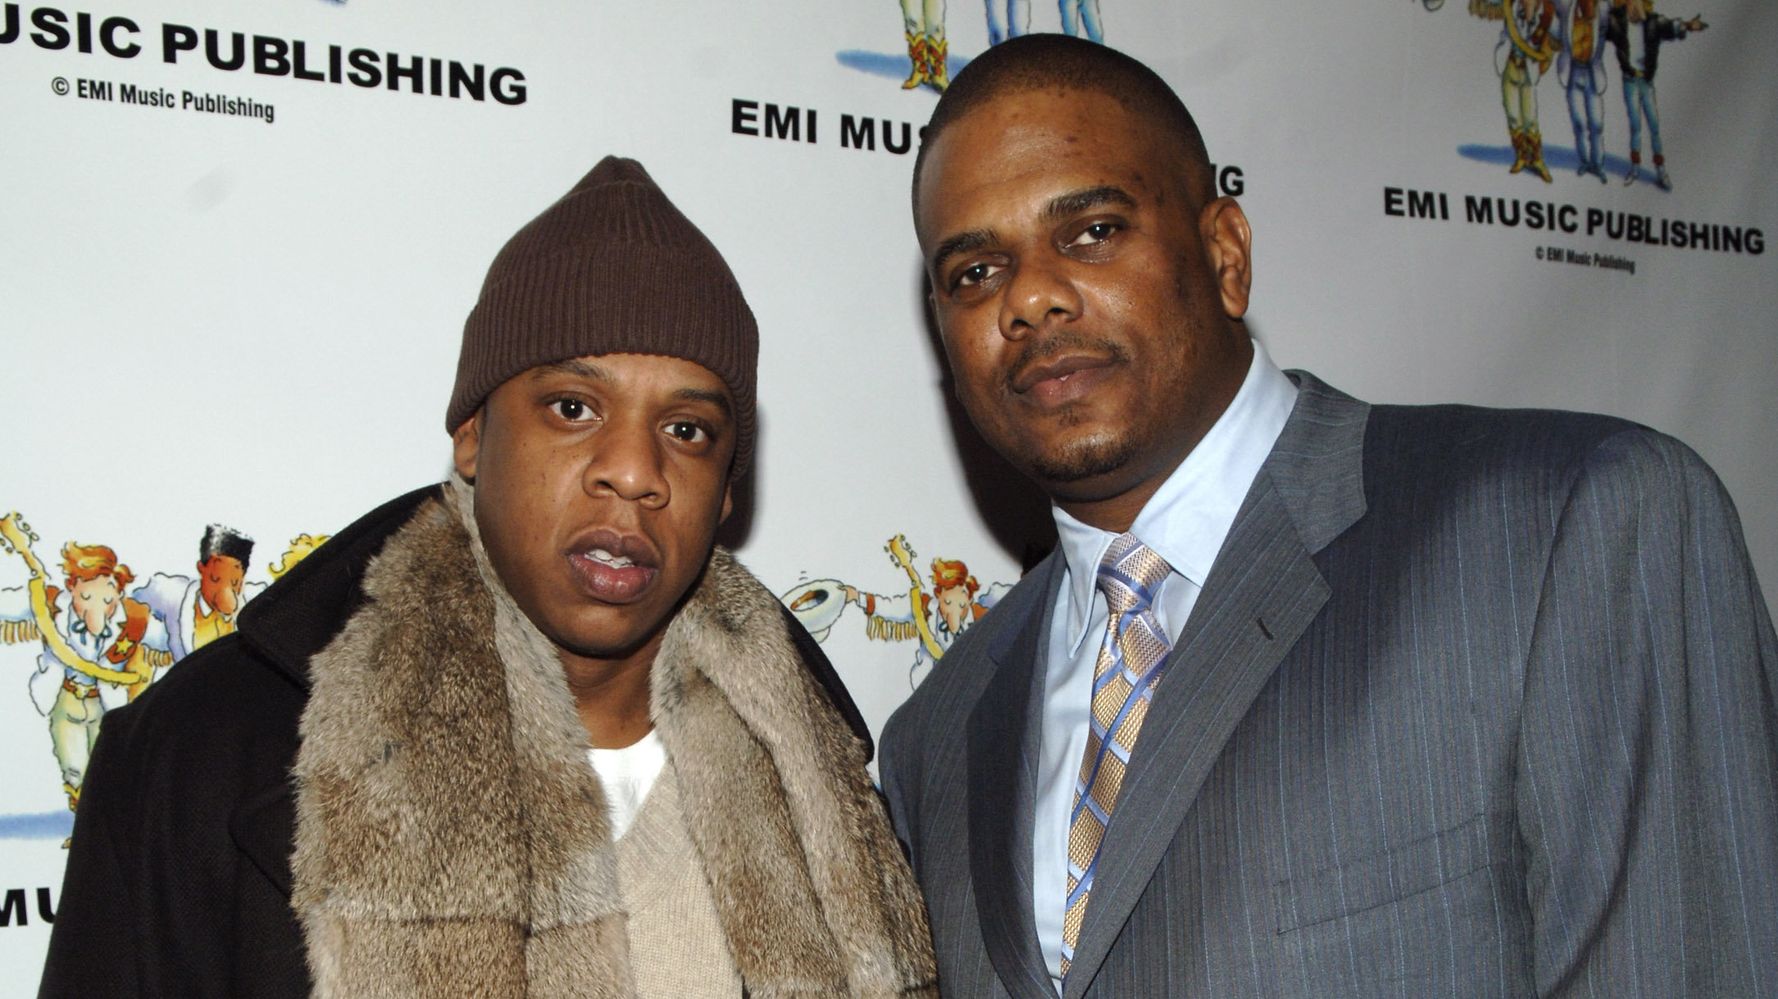 Jay Z will be the first rapper inducted into the Songwriters Hall